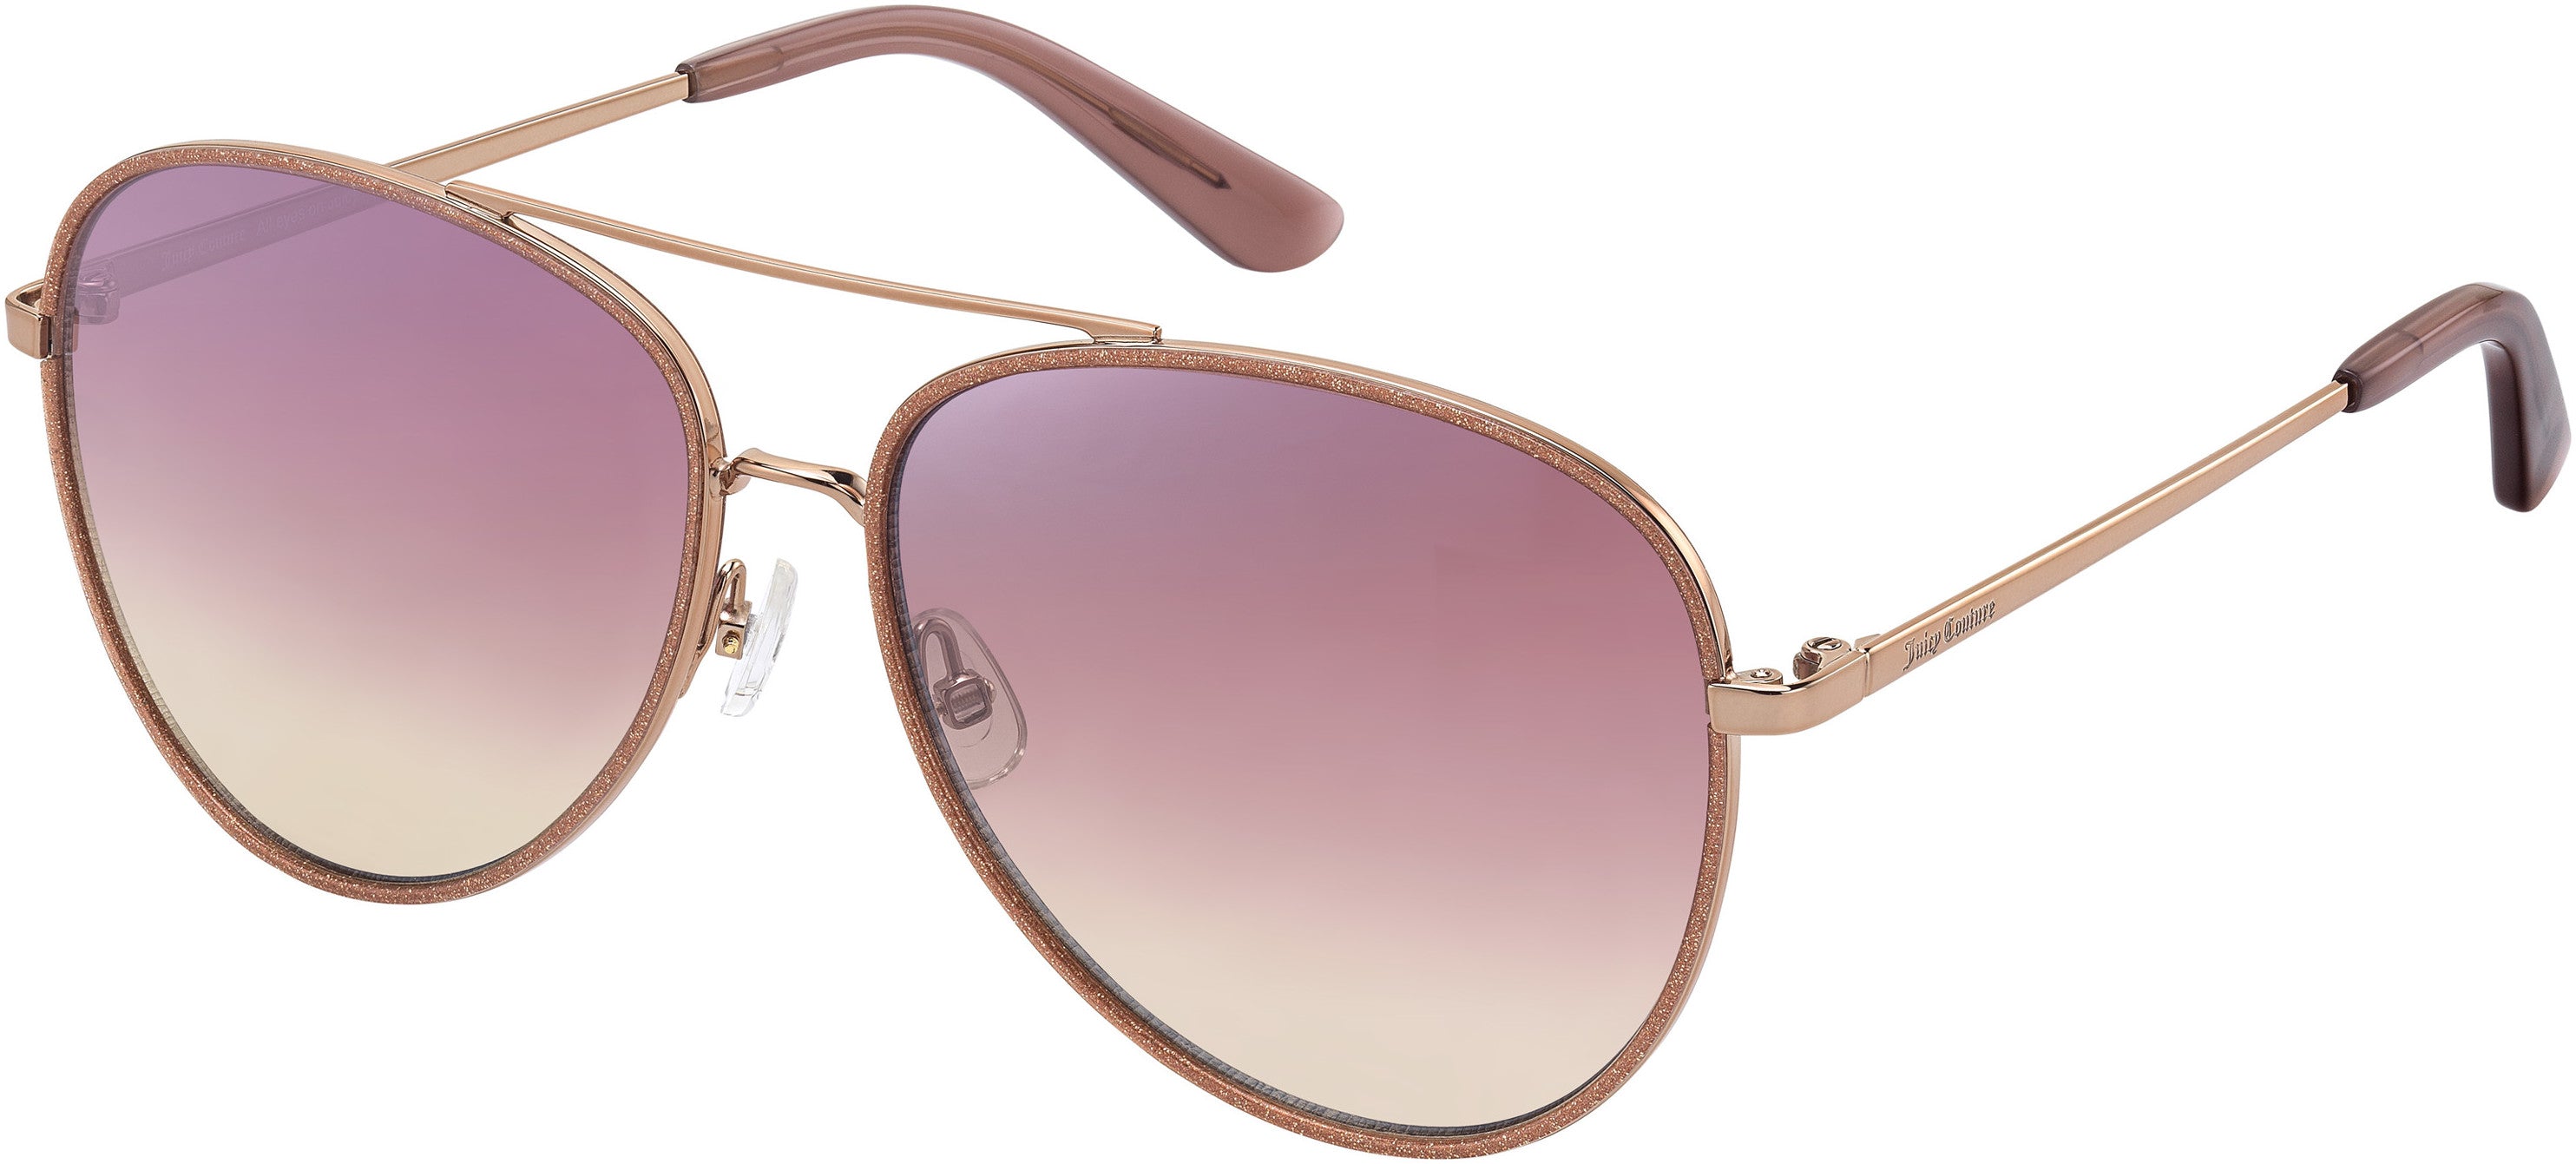 Juicy Couture Juicy 599/S Aviator Sunglasses 0AU2-0AU2  Red Gold (2S Pink Flash Silver)